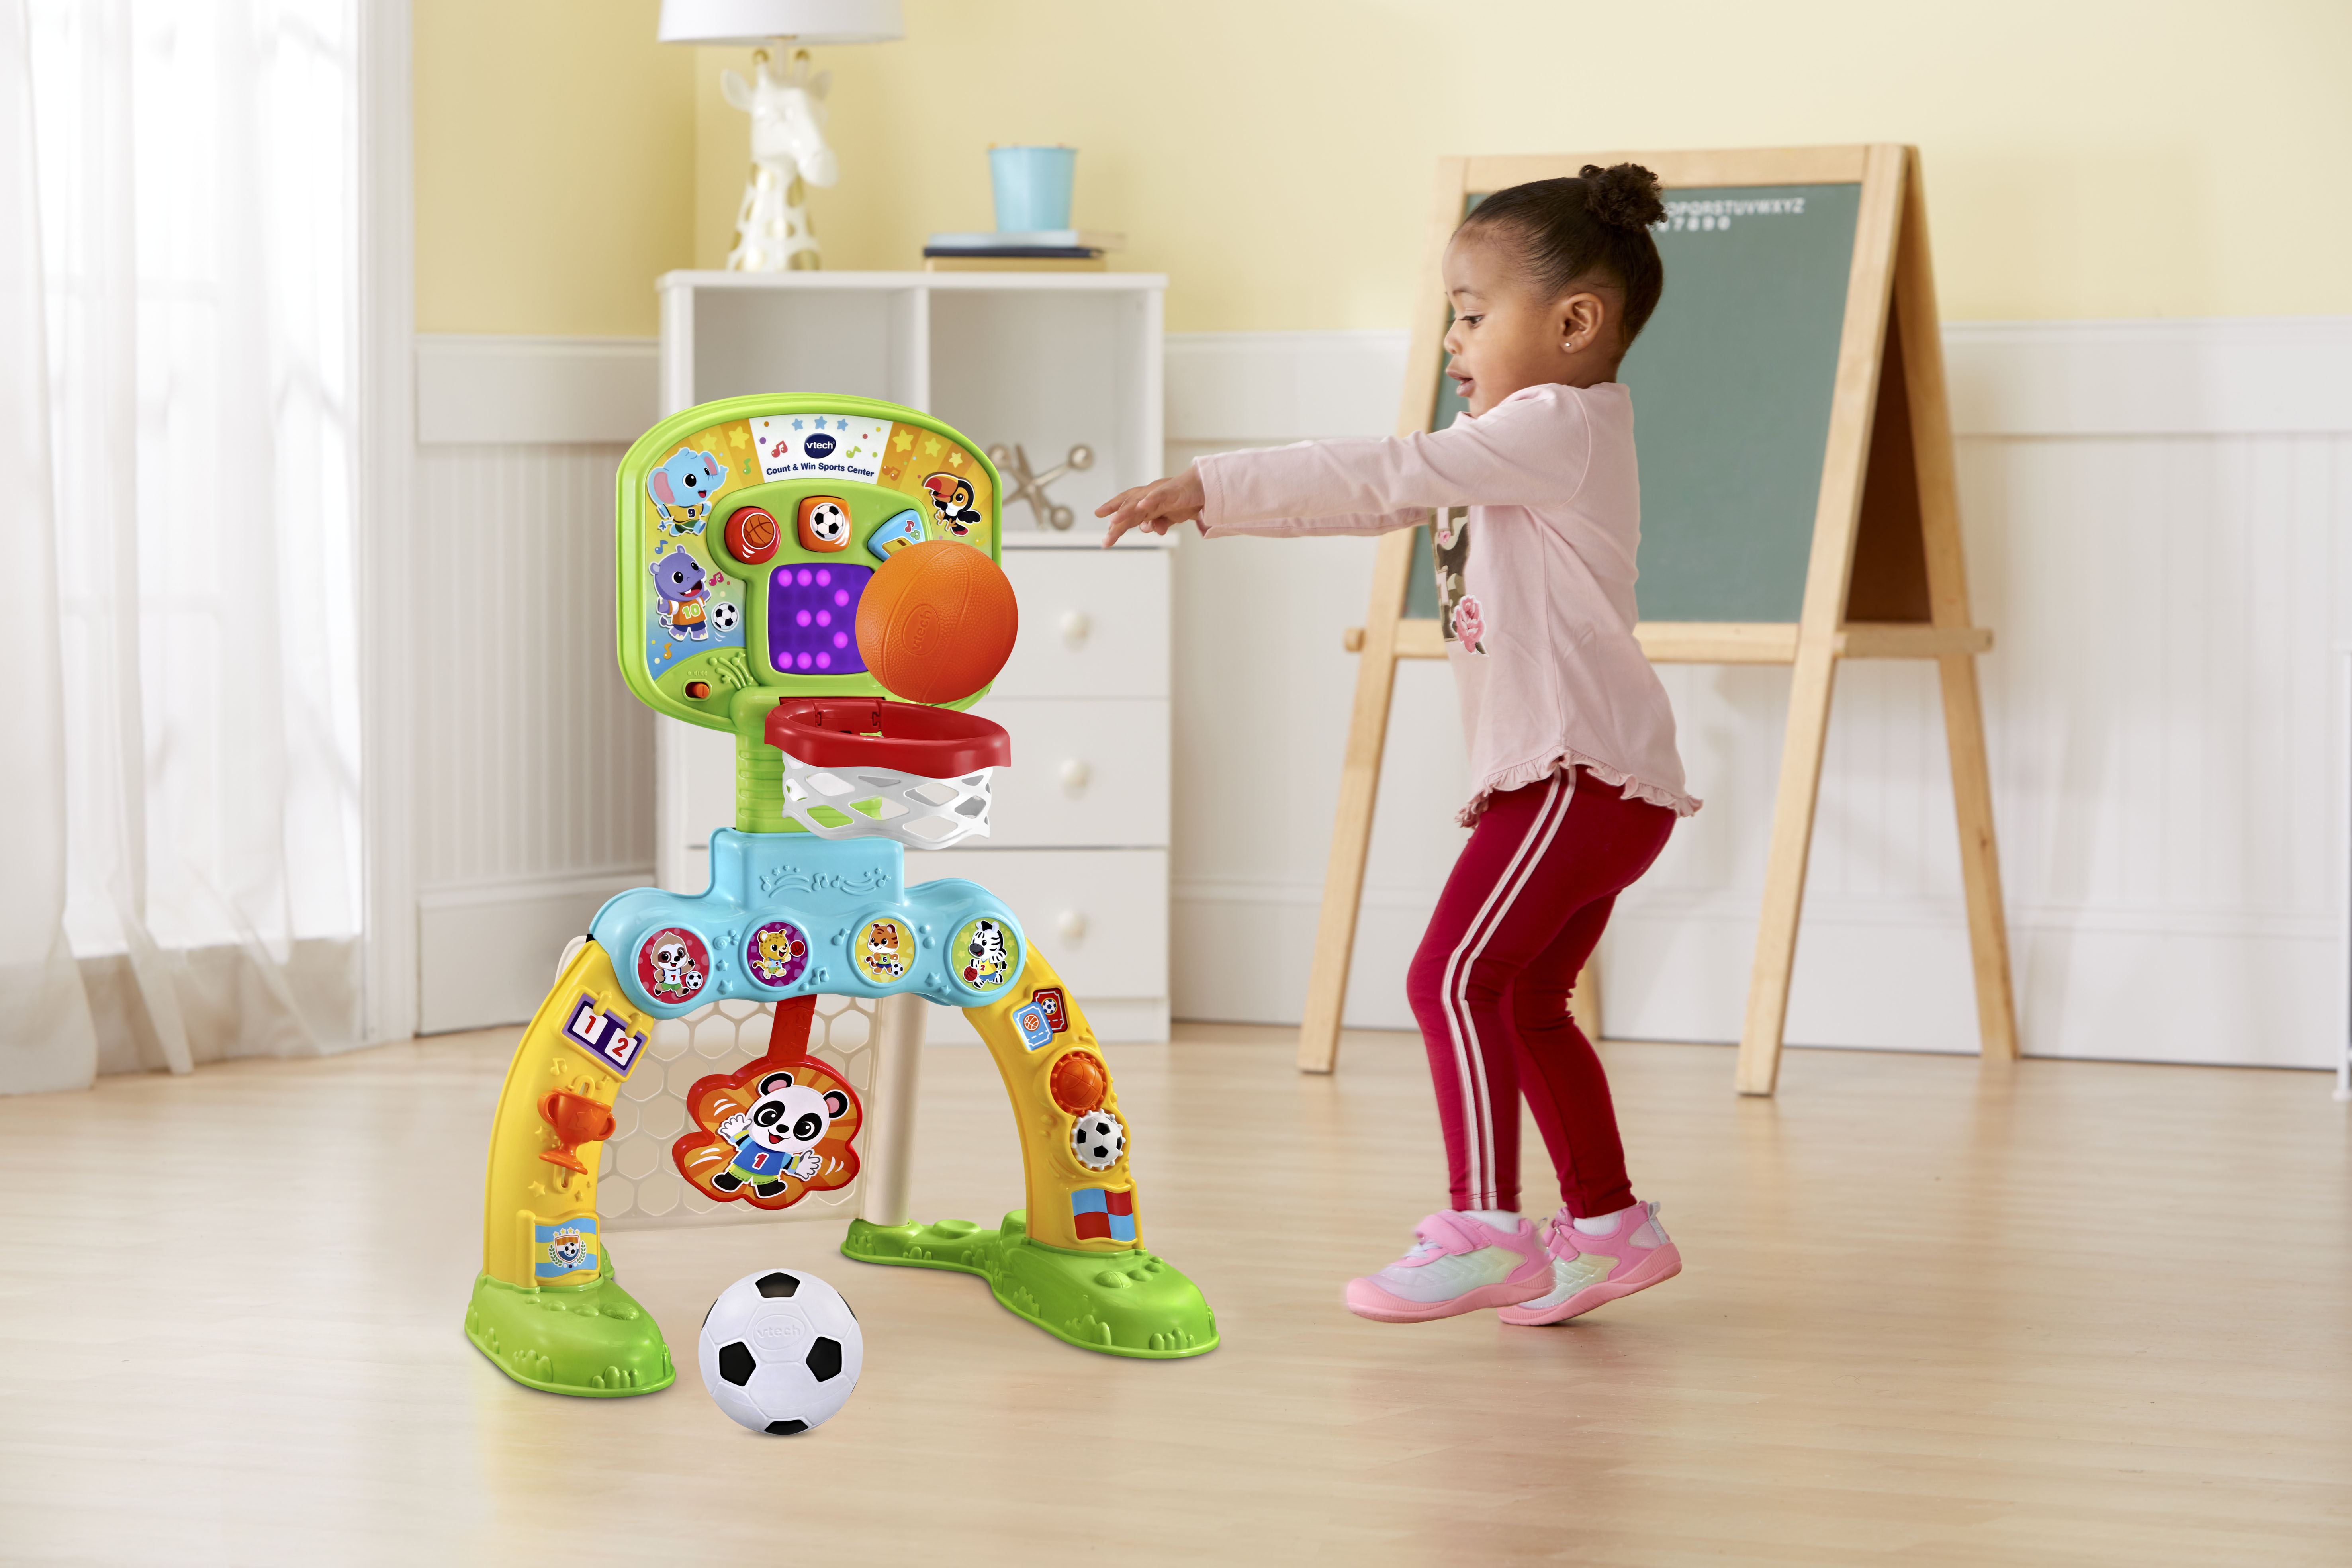 VTech Count & Win Sports Center, Basketball and Soccer Toy for Toddlers, Teaches Physical Activity - image 3 of 13